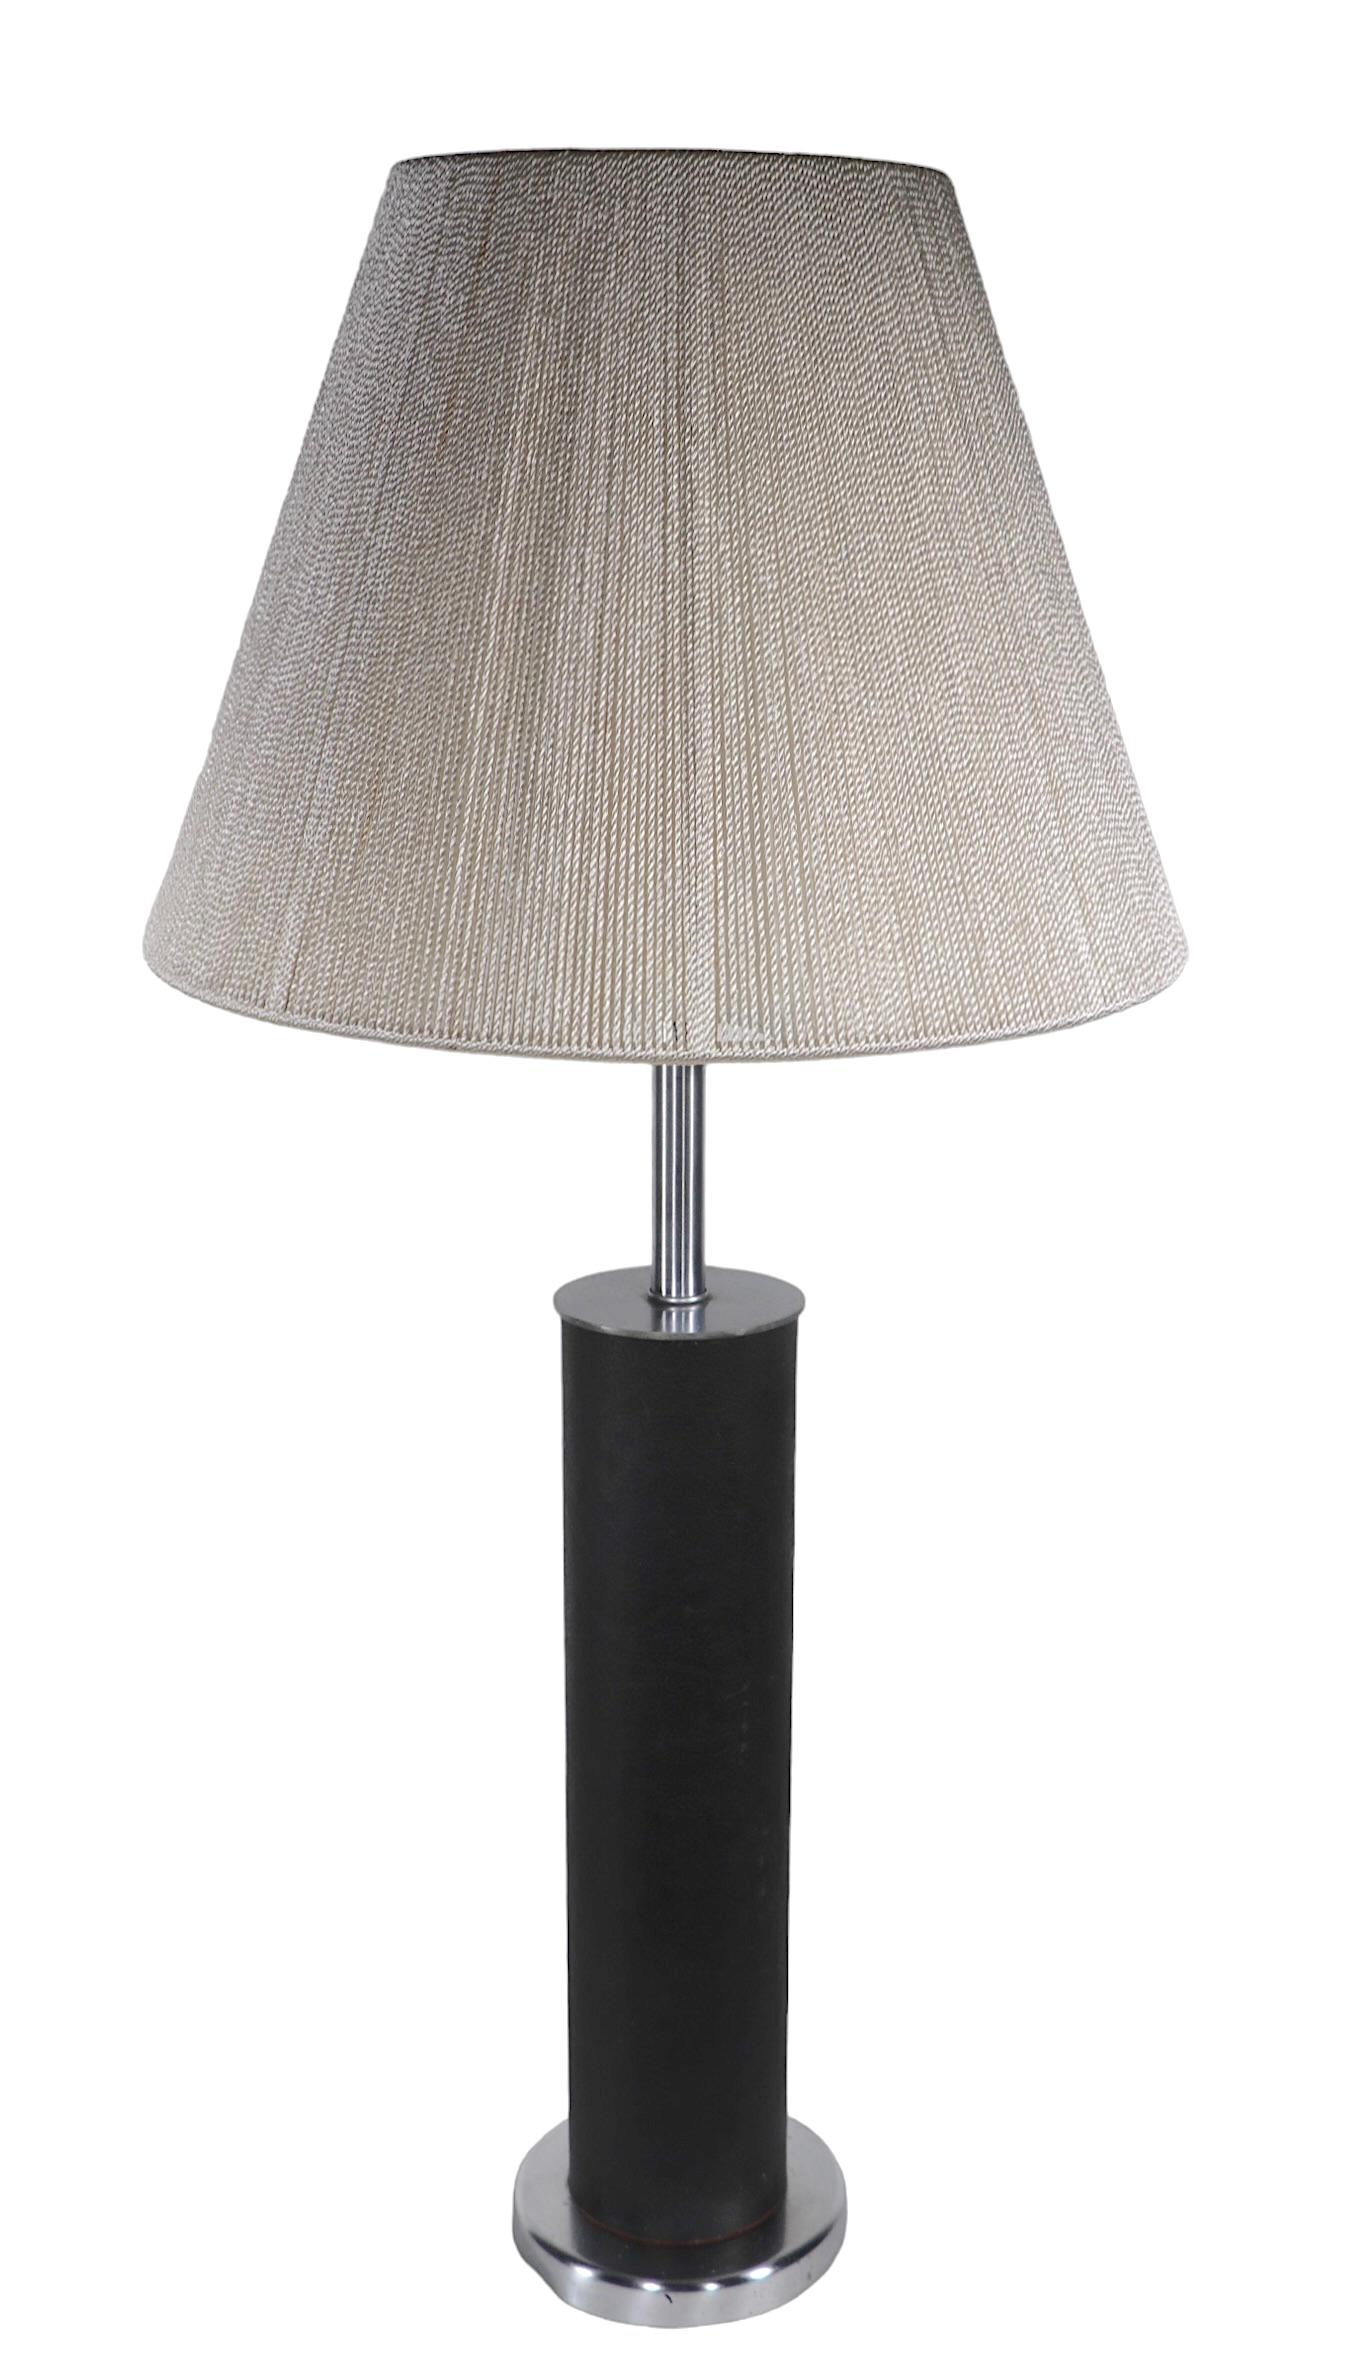  Modernist Leather and Steel Table Lamp by Walter Von Nessen c 1960's  For Sale 11